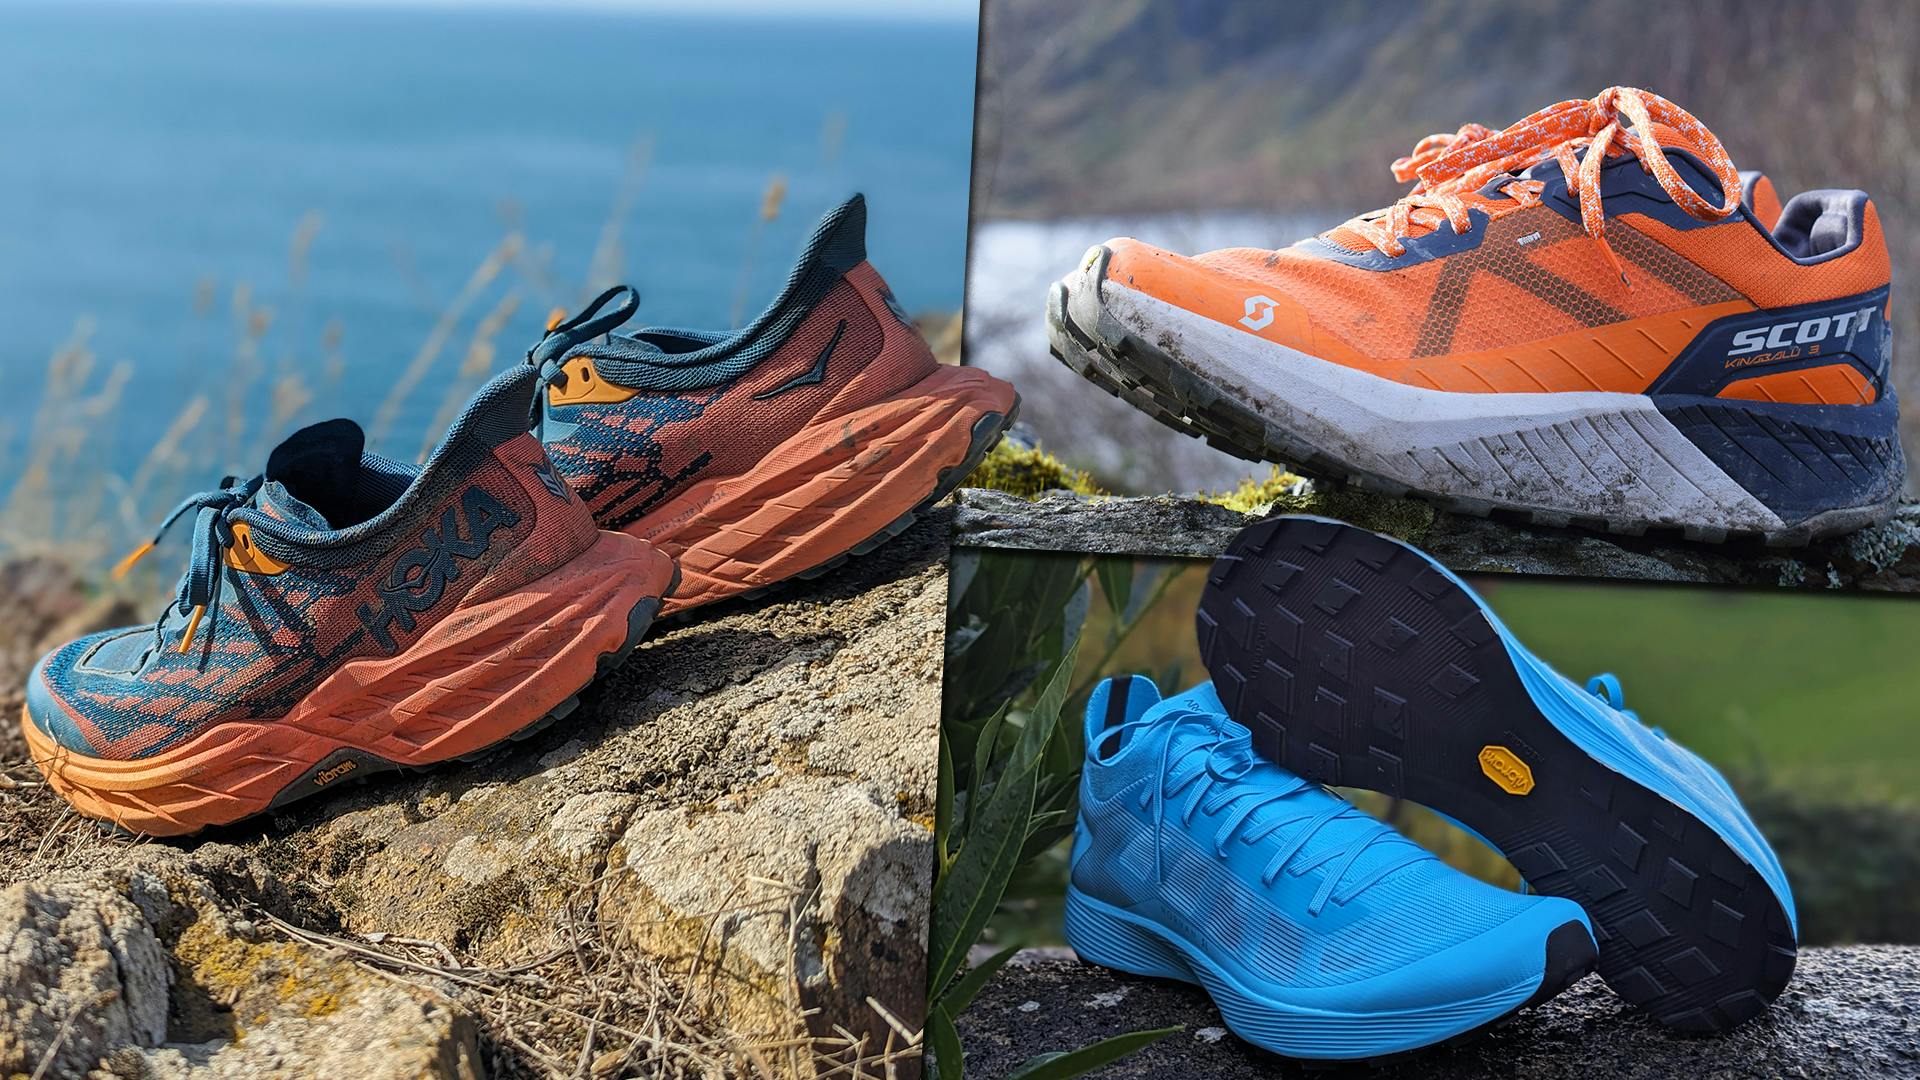 Timberland Garrison Trail Shoe | Review - Outdoors M...